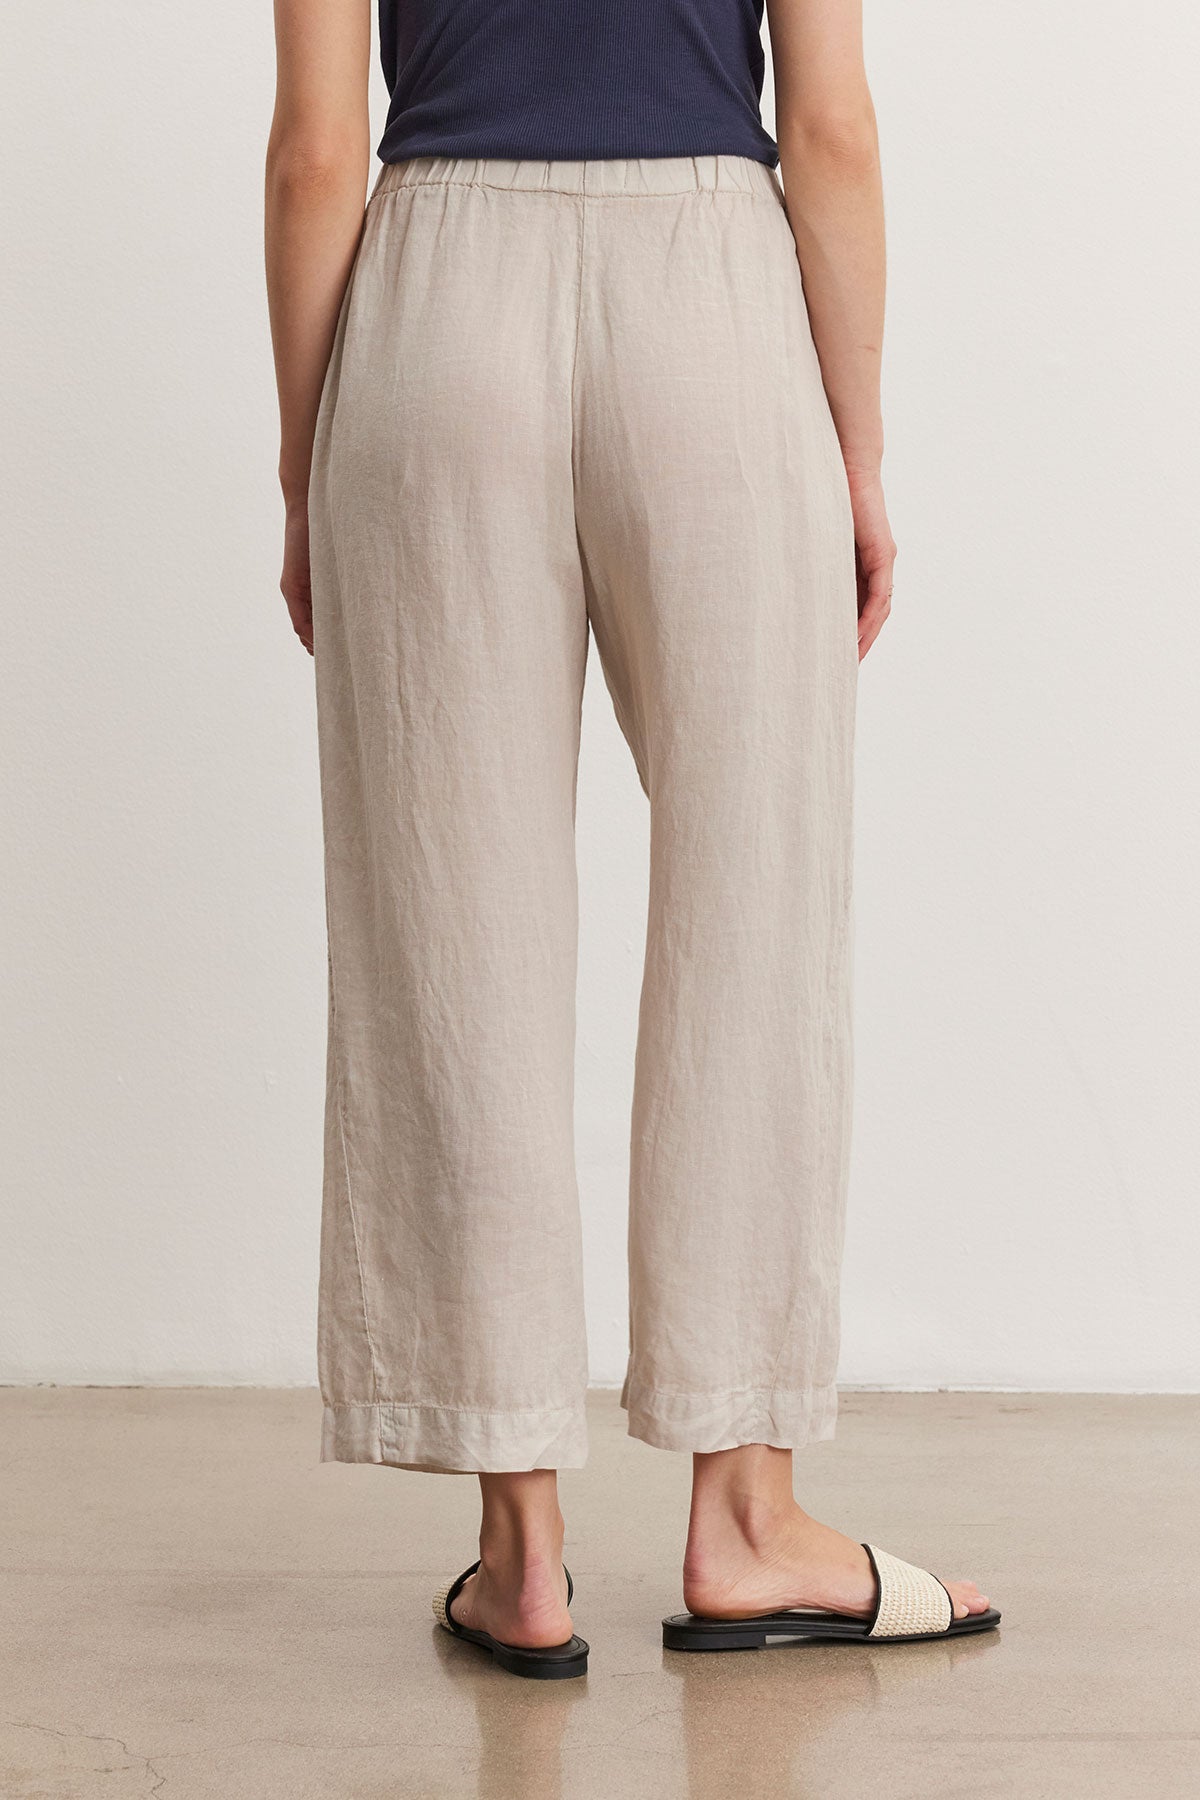   A person is standing on a polished floor, wearing beige LOLA LINEN PANT by Velvet by Graham & Spencer with an elastic waist, a navy top, and straw sandals. The photo is taken from behind. 